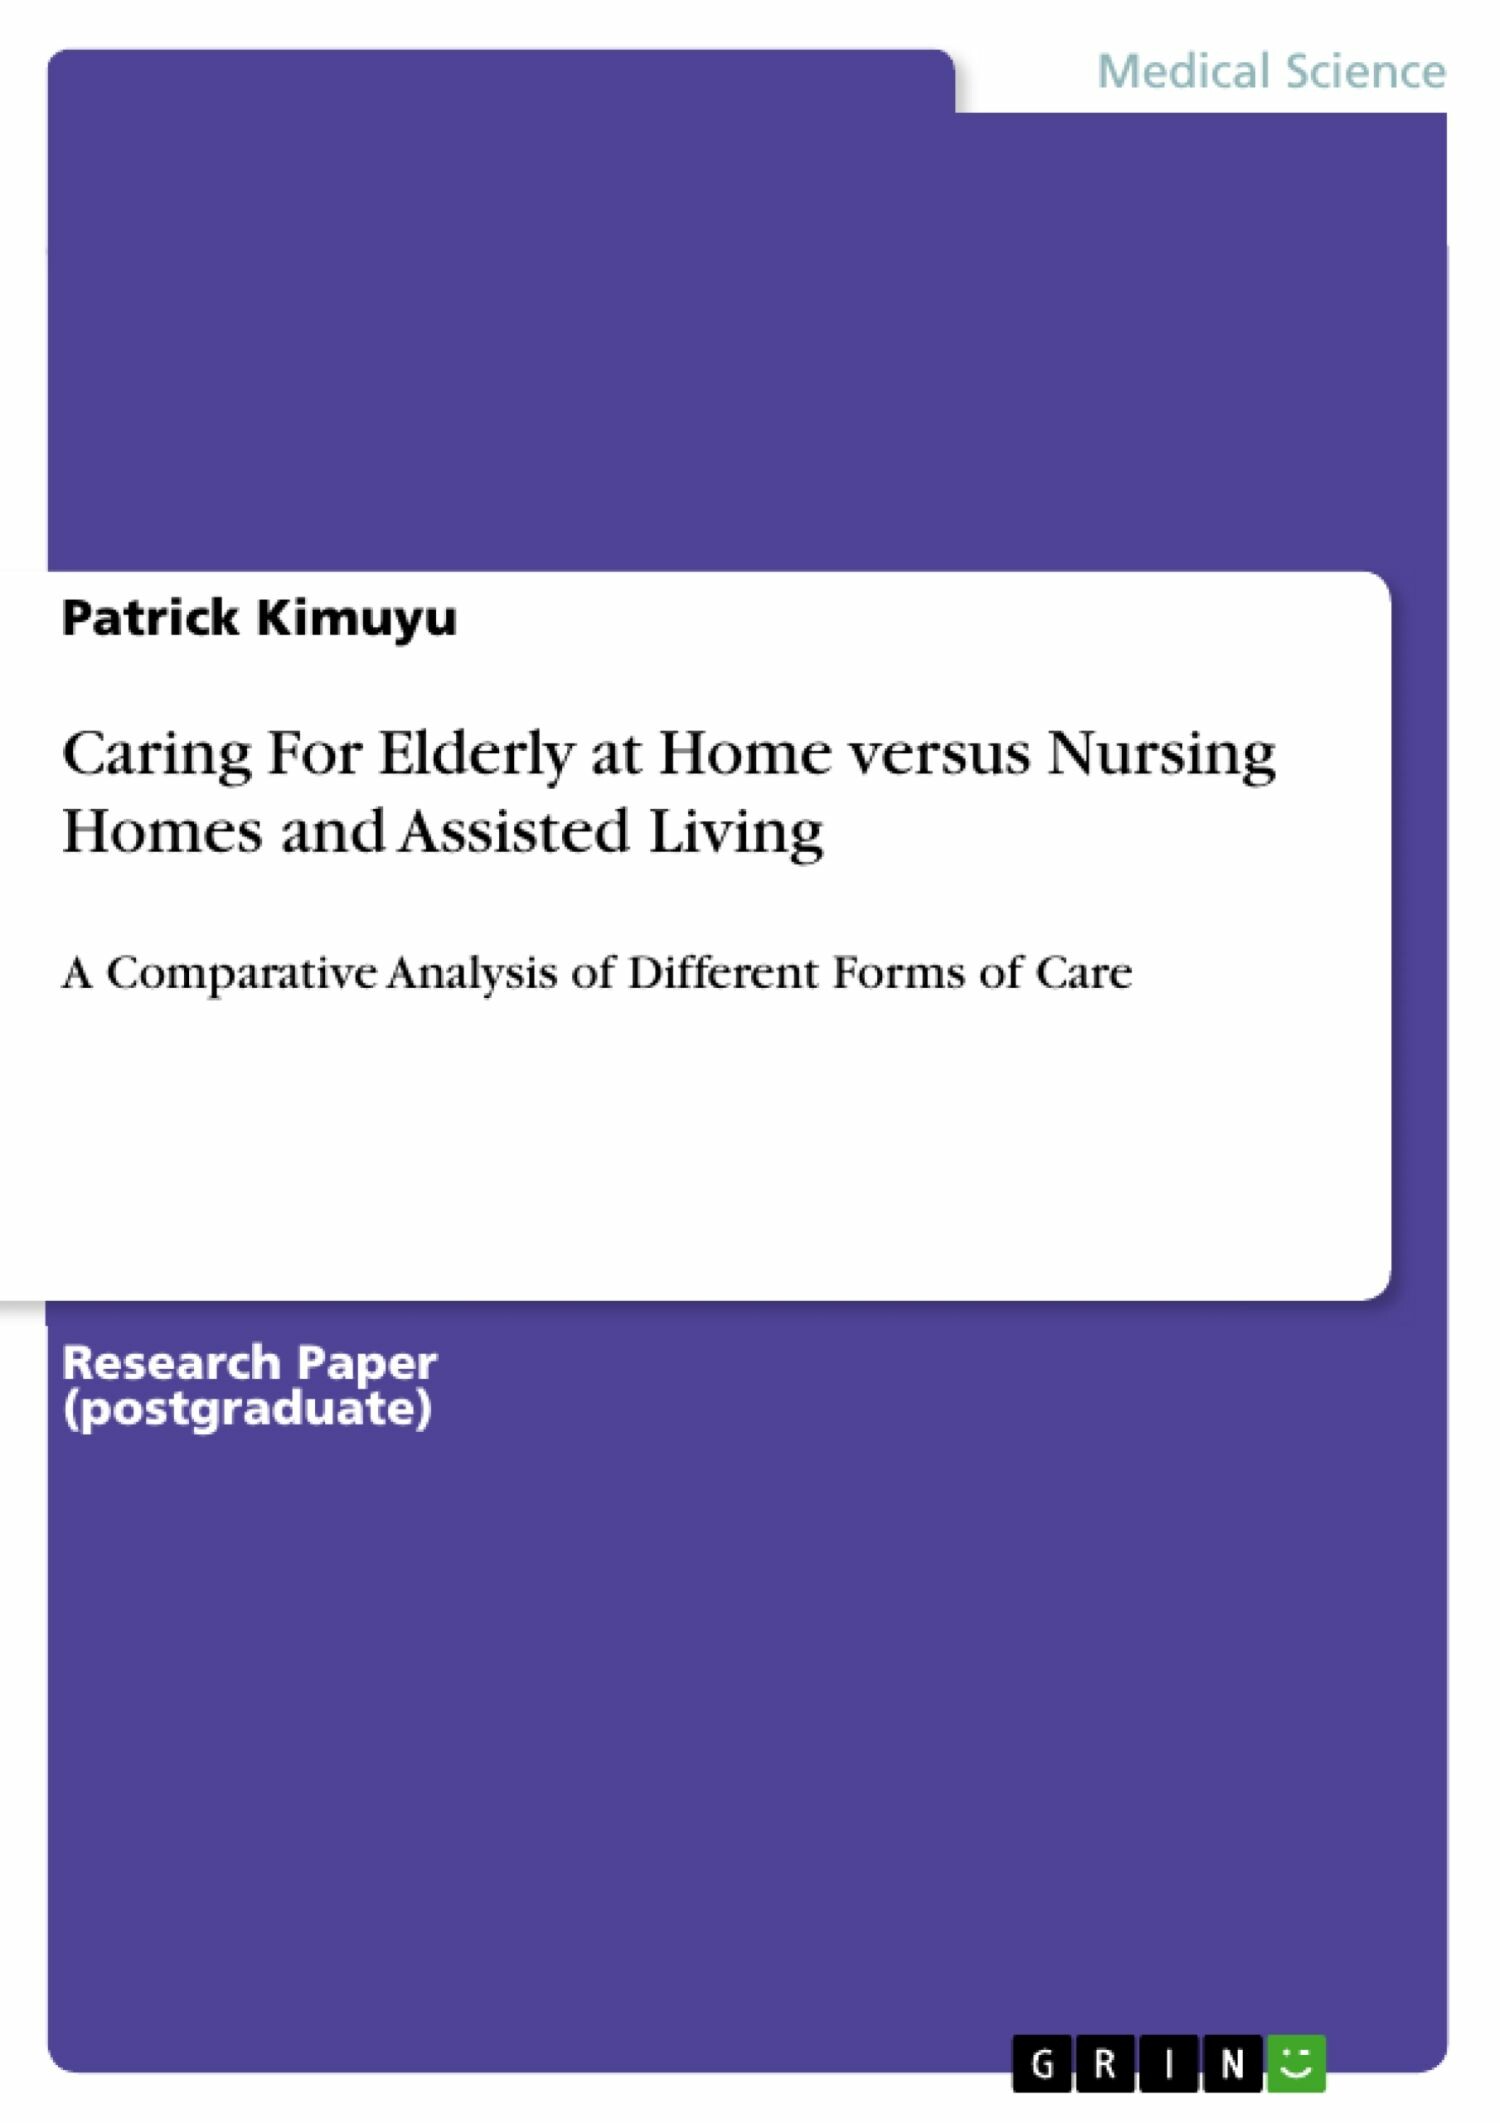 Caring For Elderly at Home versus Nursing Homes and Assisted Living